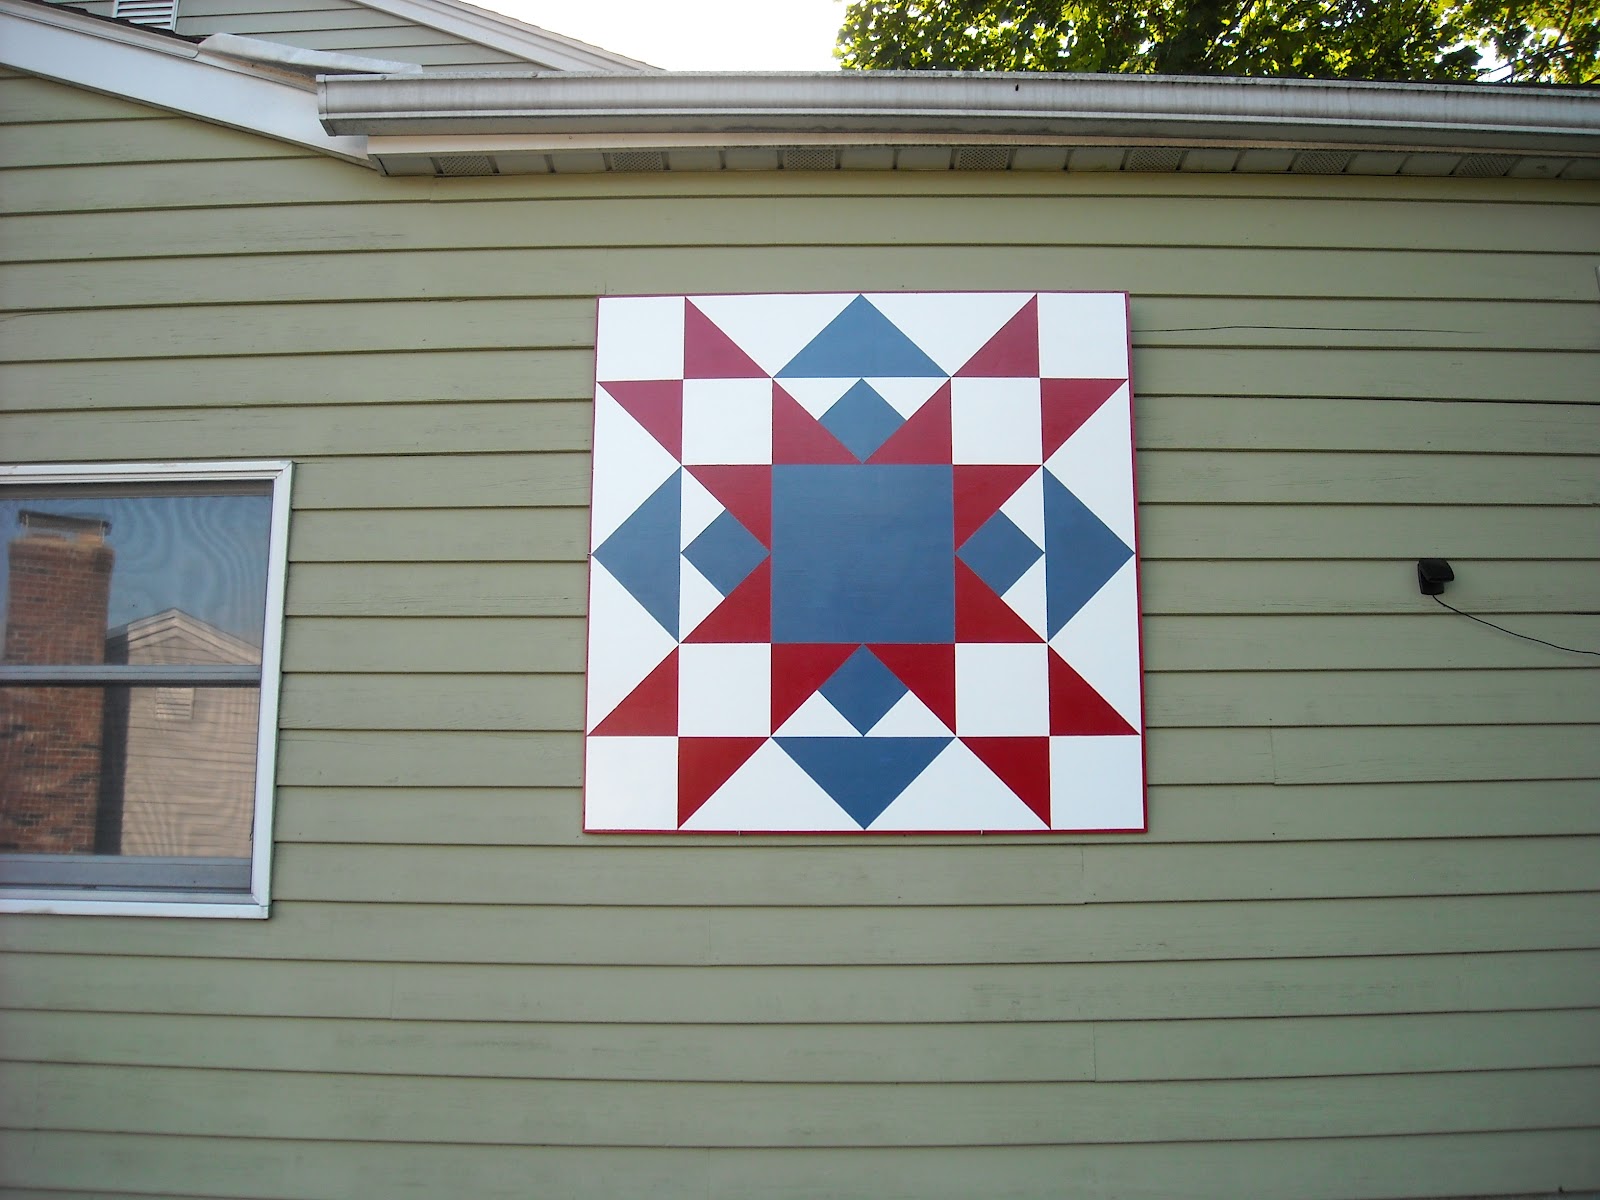 Barn Quilts by Dave: My first 4X4 barn quilt!!